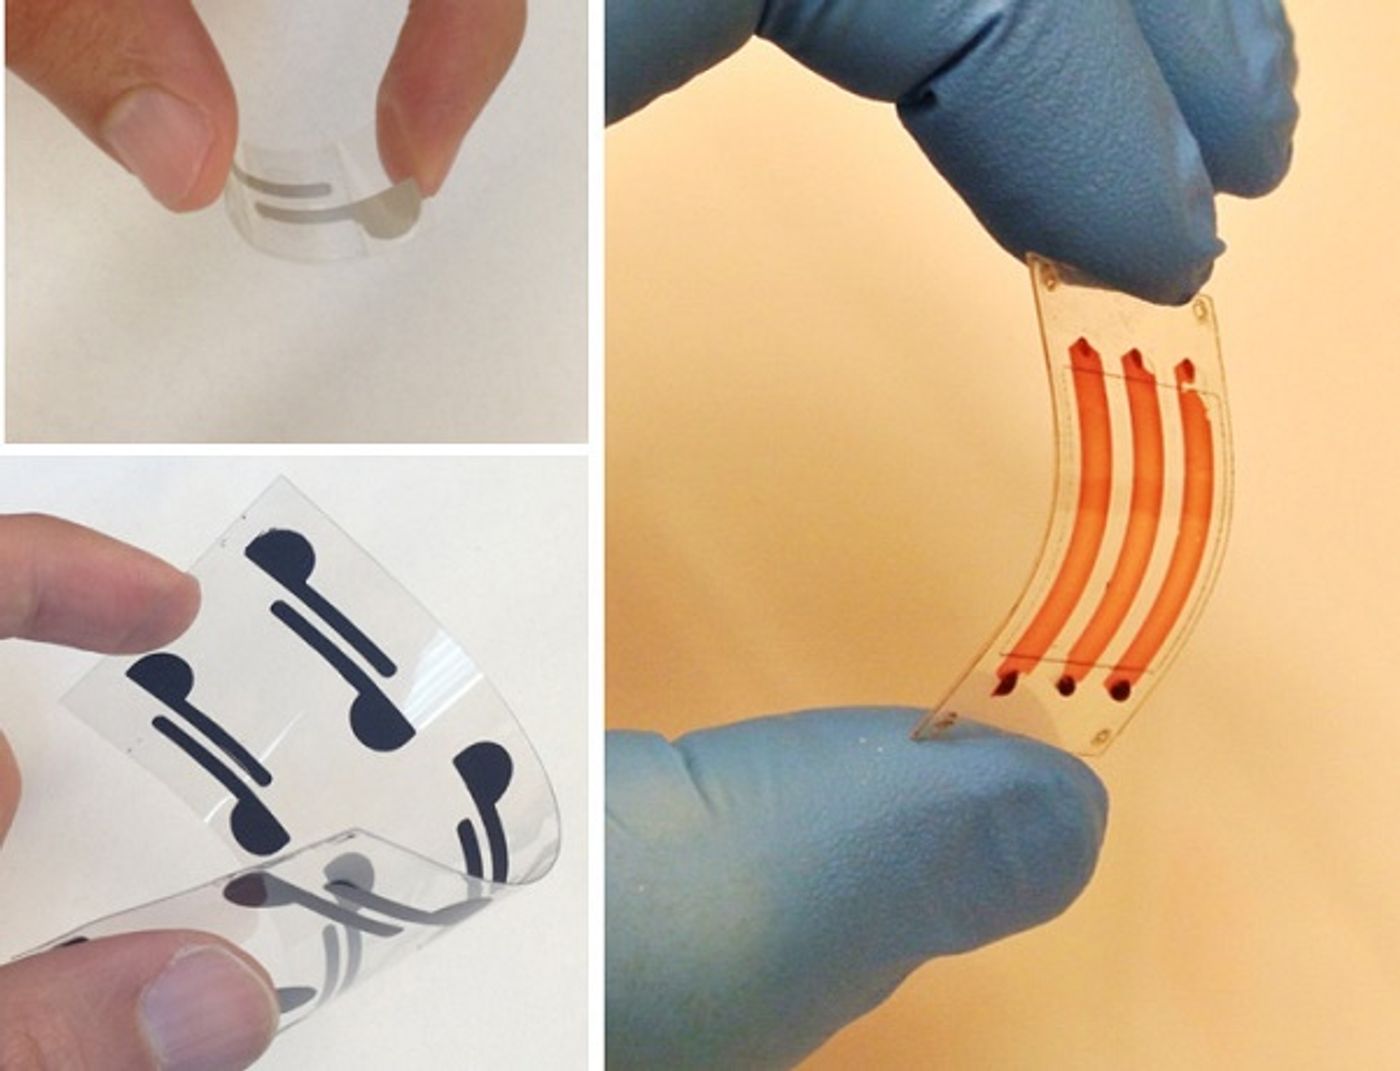 Thin, lightweight, flexible materials developed by researchers at Florida Atlantic University, Stanford, and Harvard, integrate cellulose paper and flexible polyester films as new diagnostic tools to detect bioagents in whole blood, serum, and peritoneal fluid.